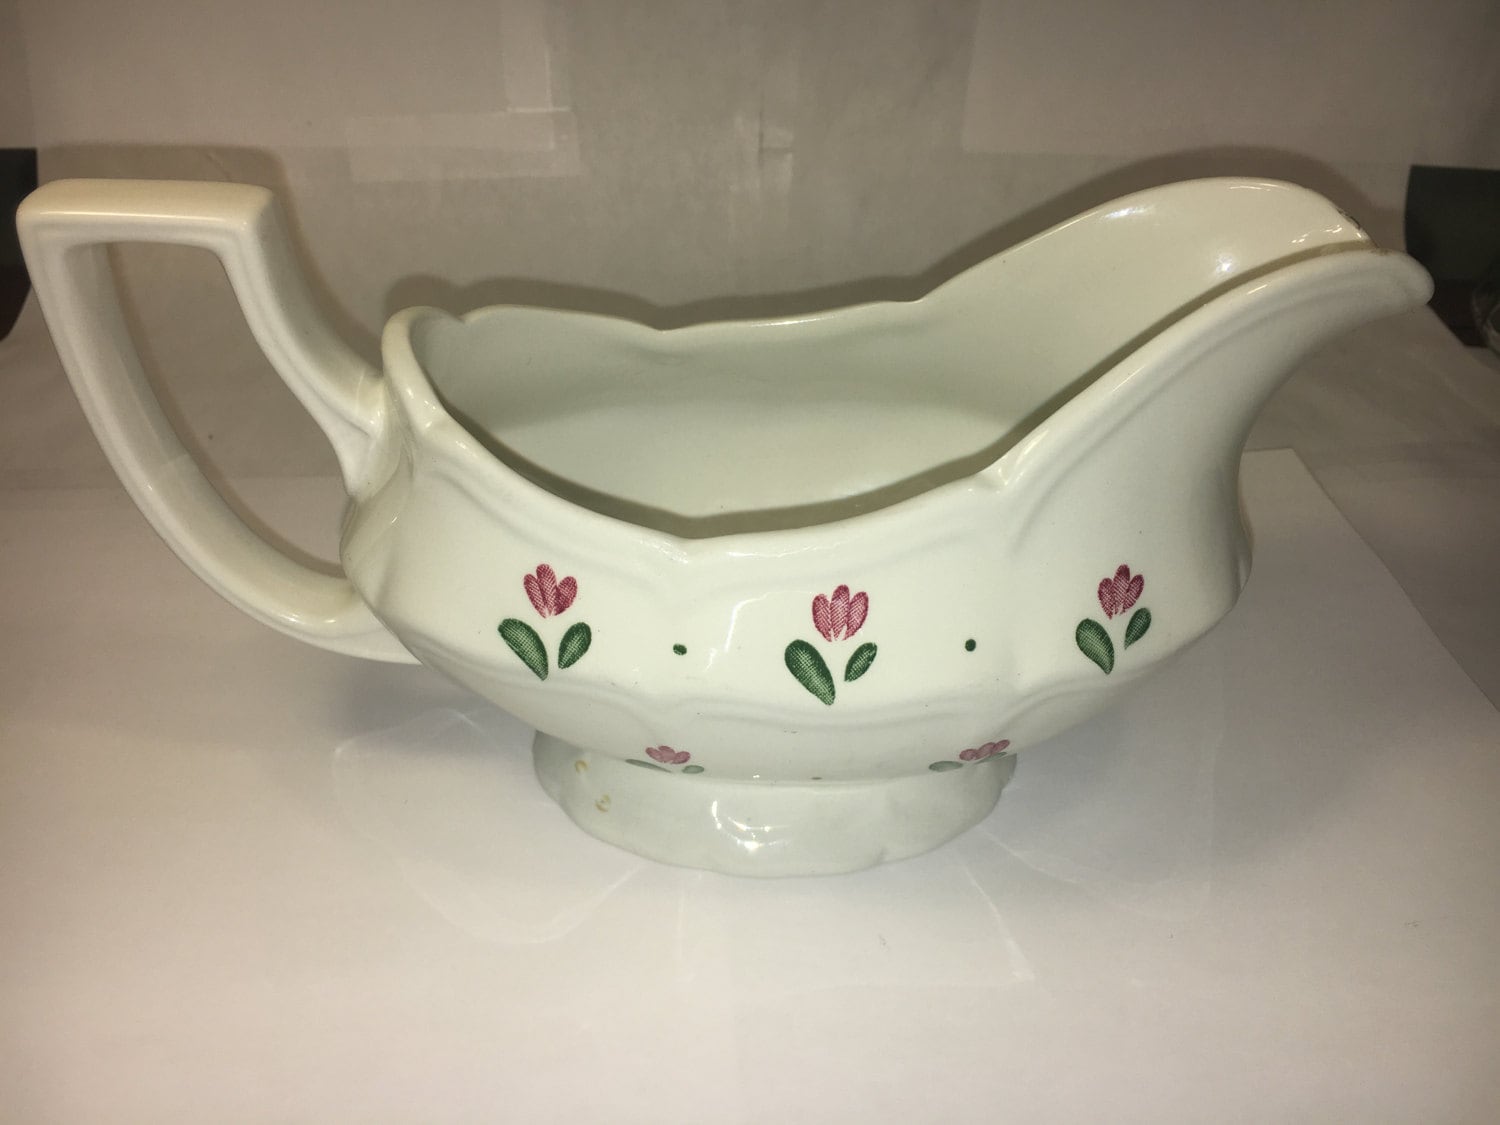 festive traditions gravy boat by gibson designs